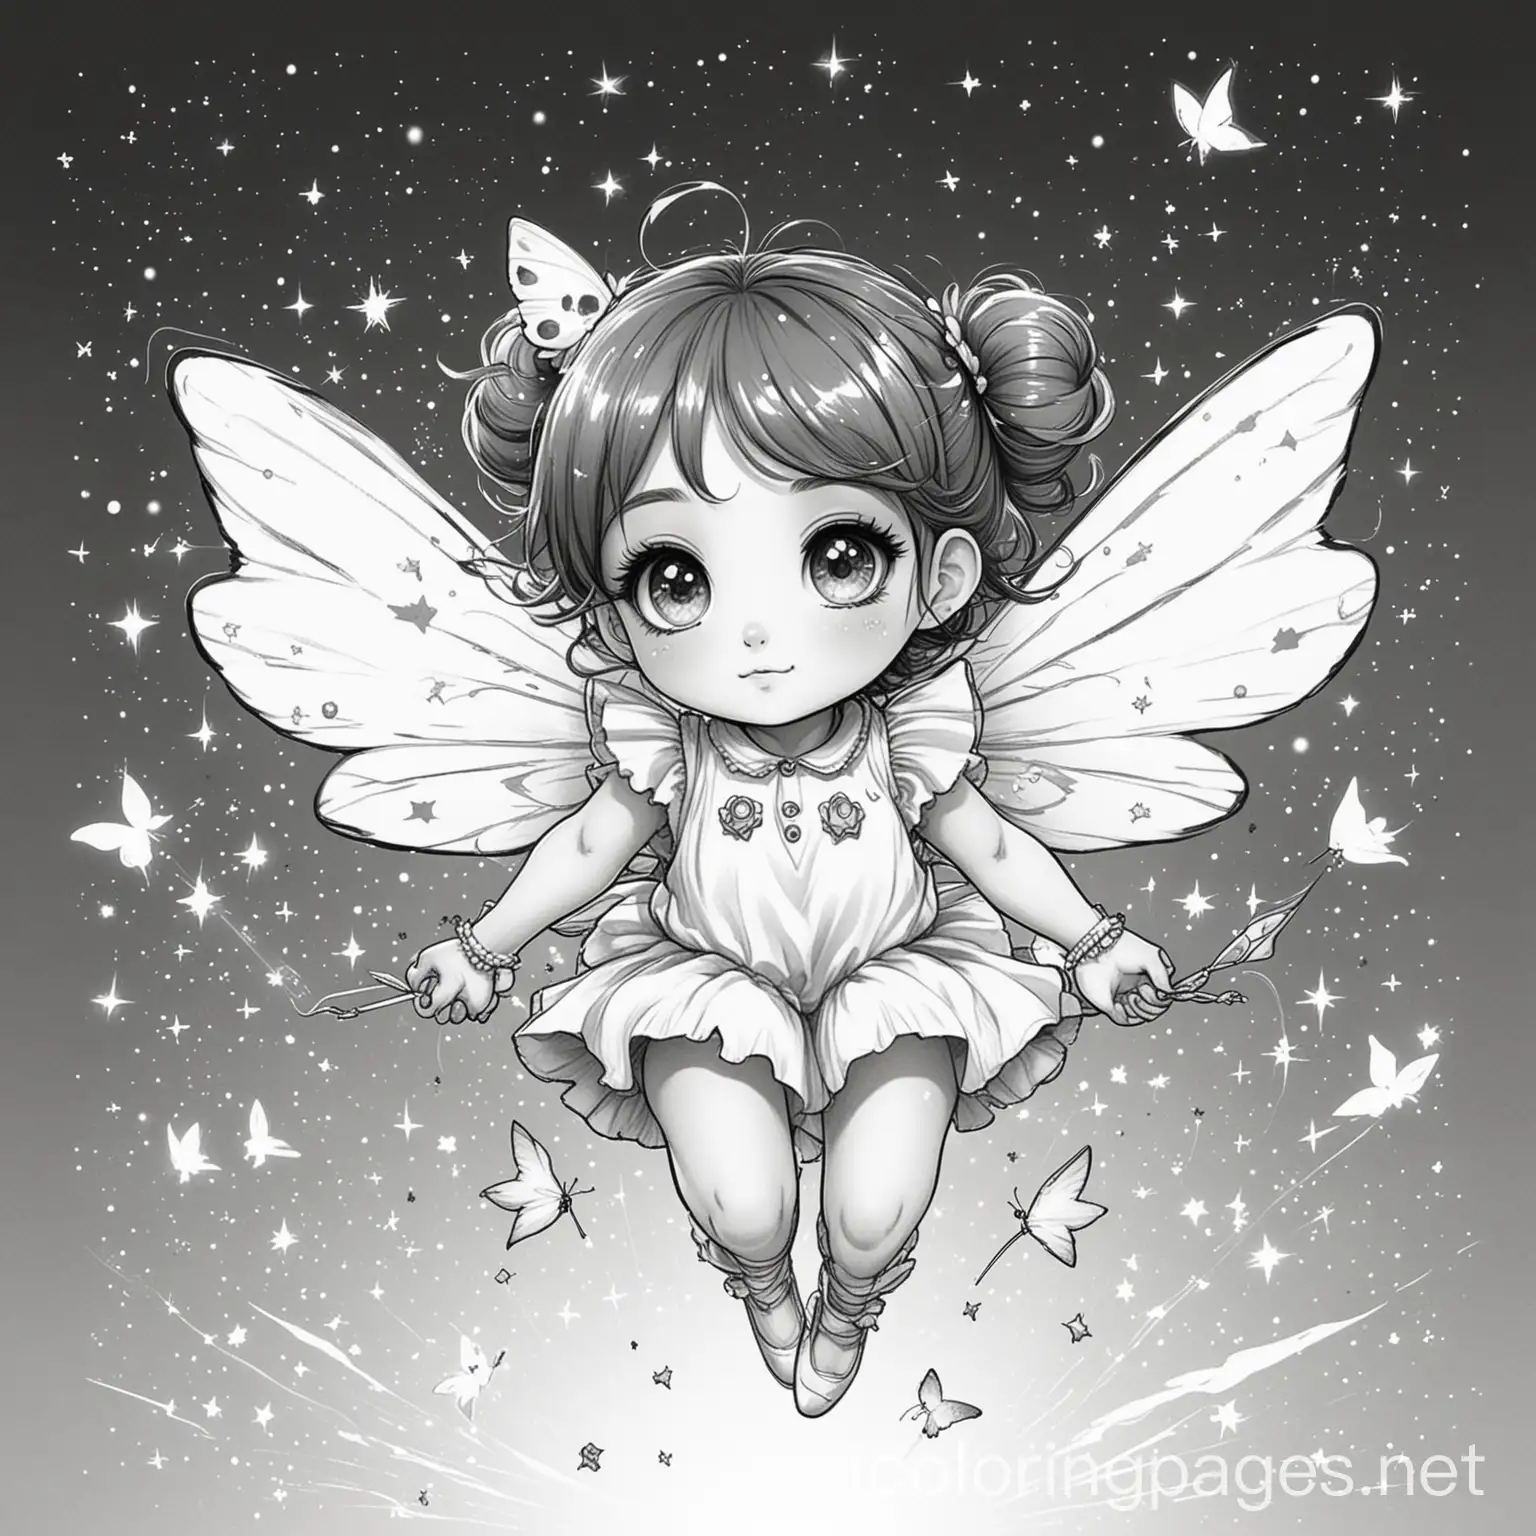 a magical girl and her pet, a small creature with butterfly wings and round fluffy body, large cute eyes and tiny antennae on top of its head, flying among the stars and the shooting stars., Coloring Page, black and white, line art, white background, Simplicity, Ample White Space. The background of the coloring page is plain white to make it easy for young children to color within the lines. The outlines of all the subjects are easy to distinguish, making it simple for kids to color without too much difficulty